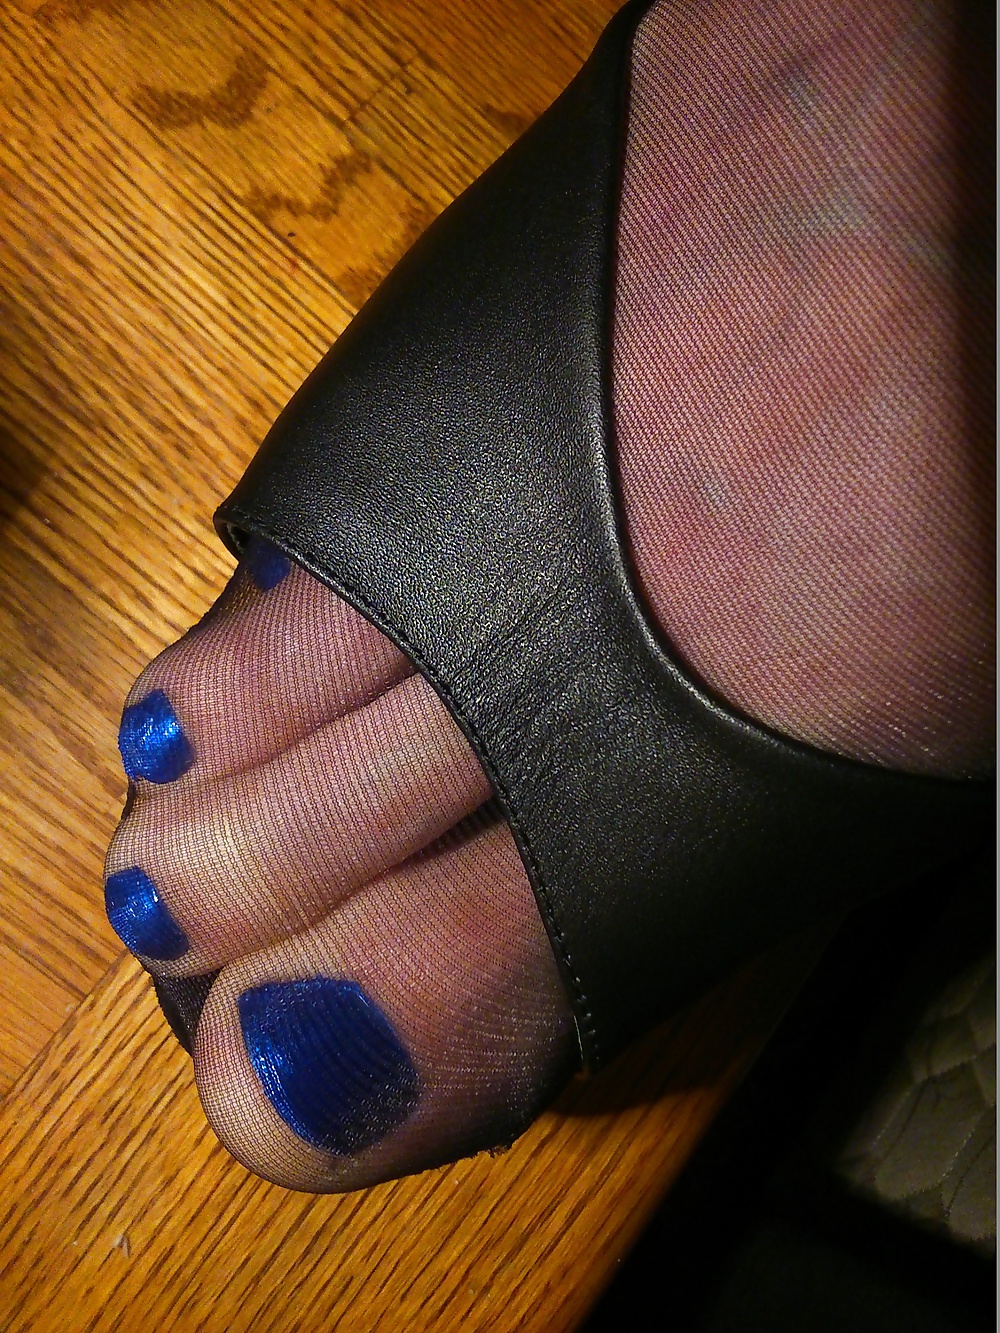 Feet In Black Stockings, Leather High Heels And Blue Polish #33374551